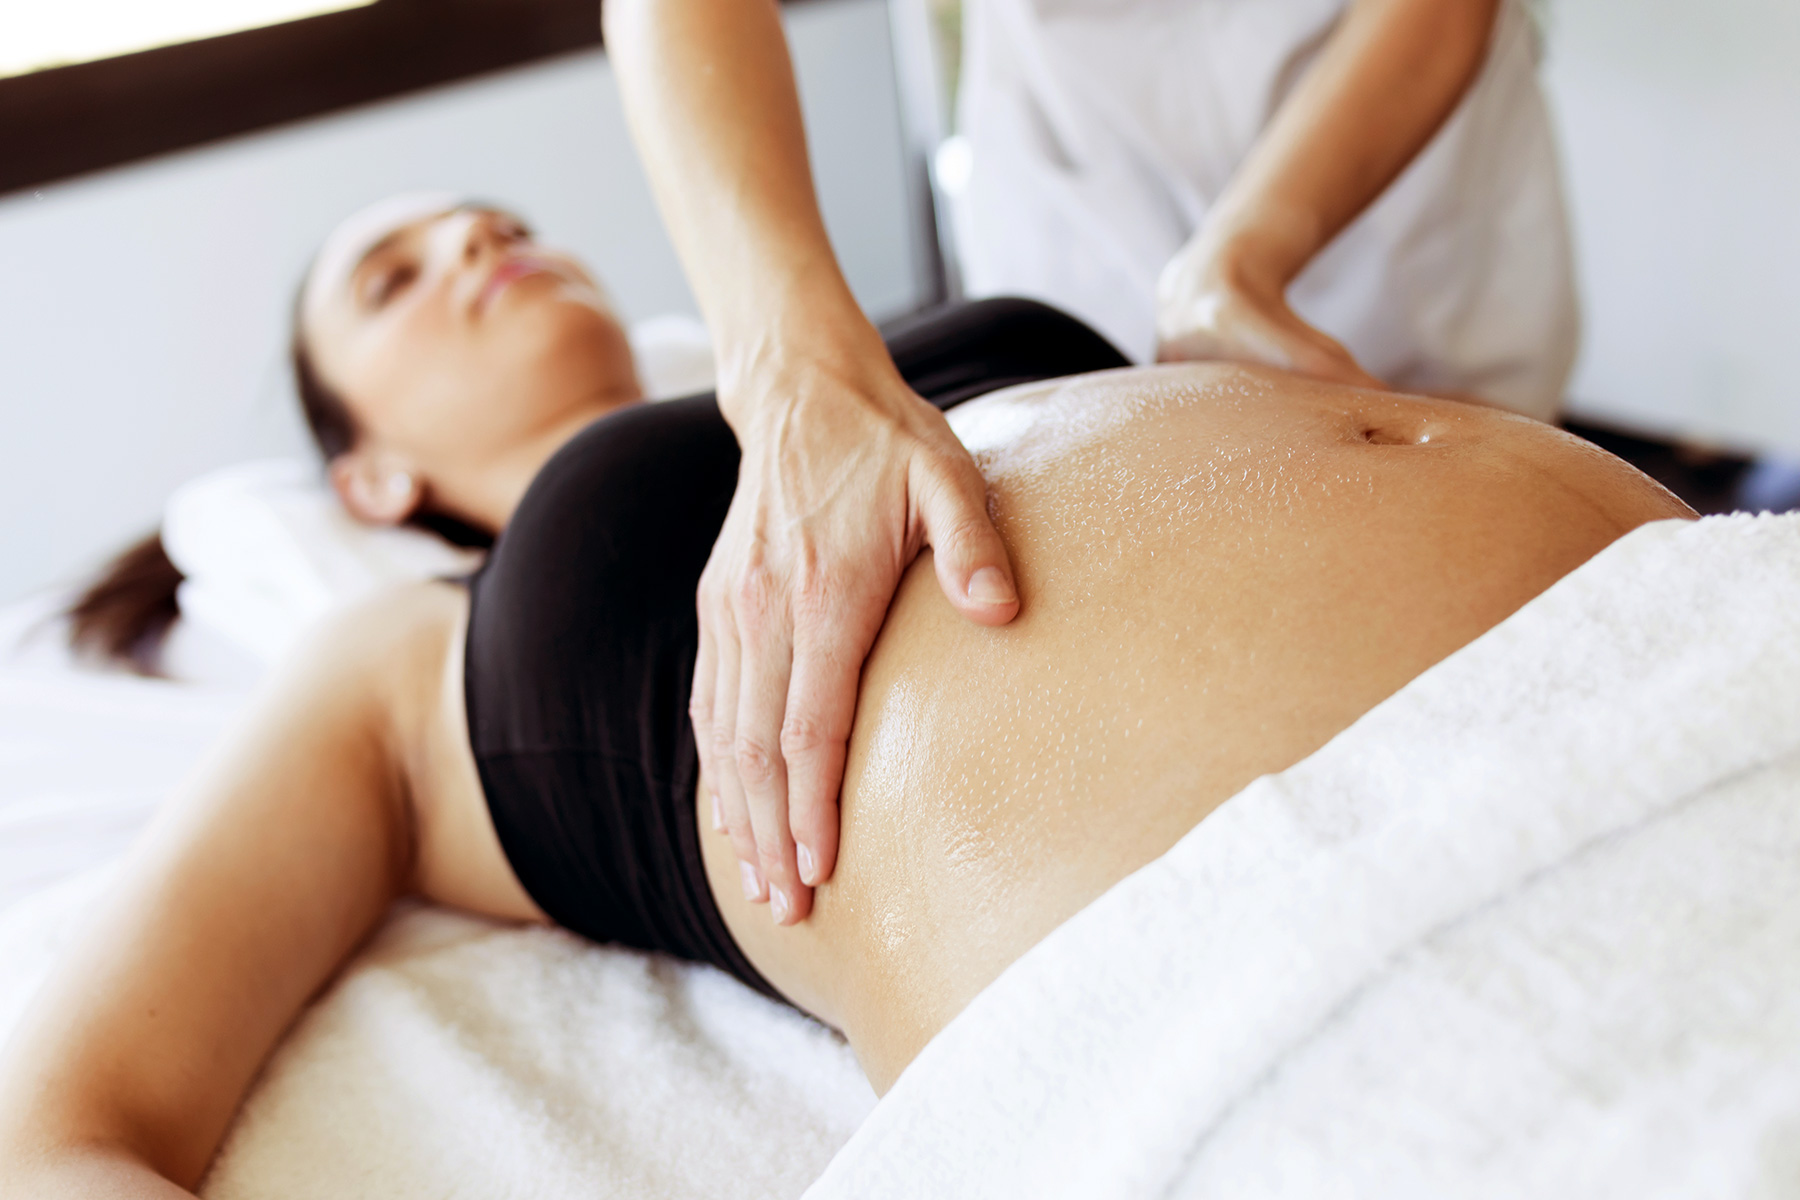 Can You Get a Massage While Pregnant?